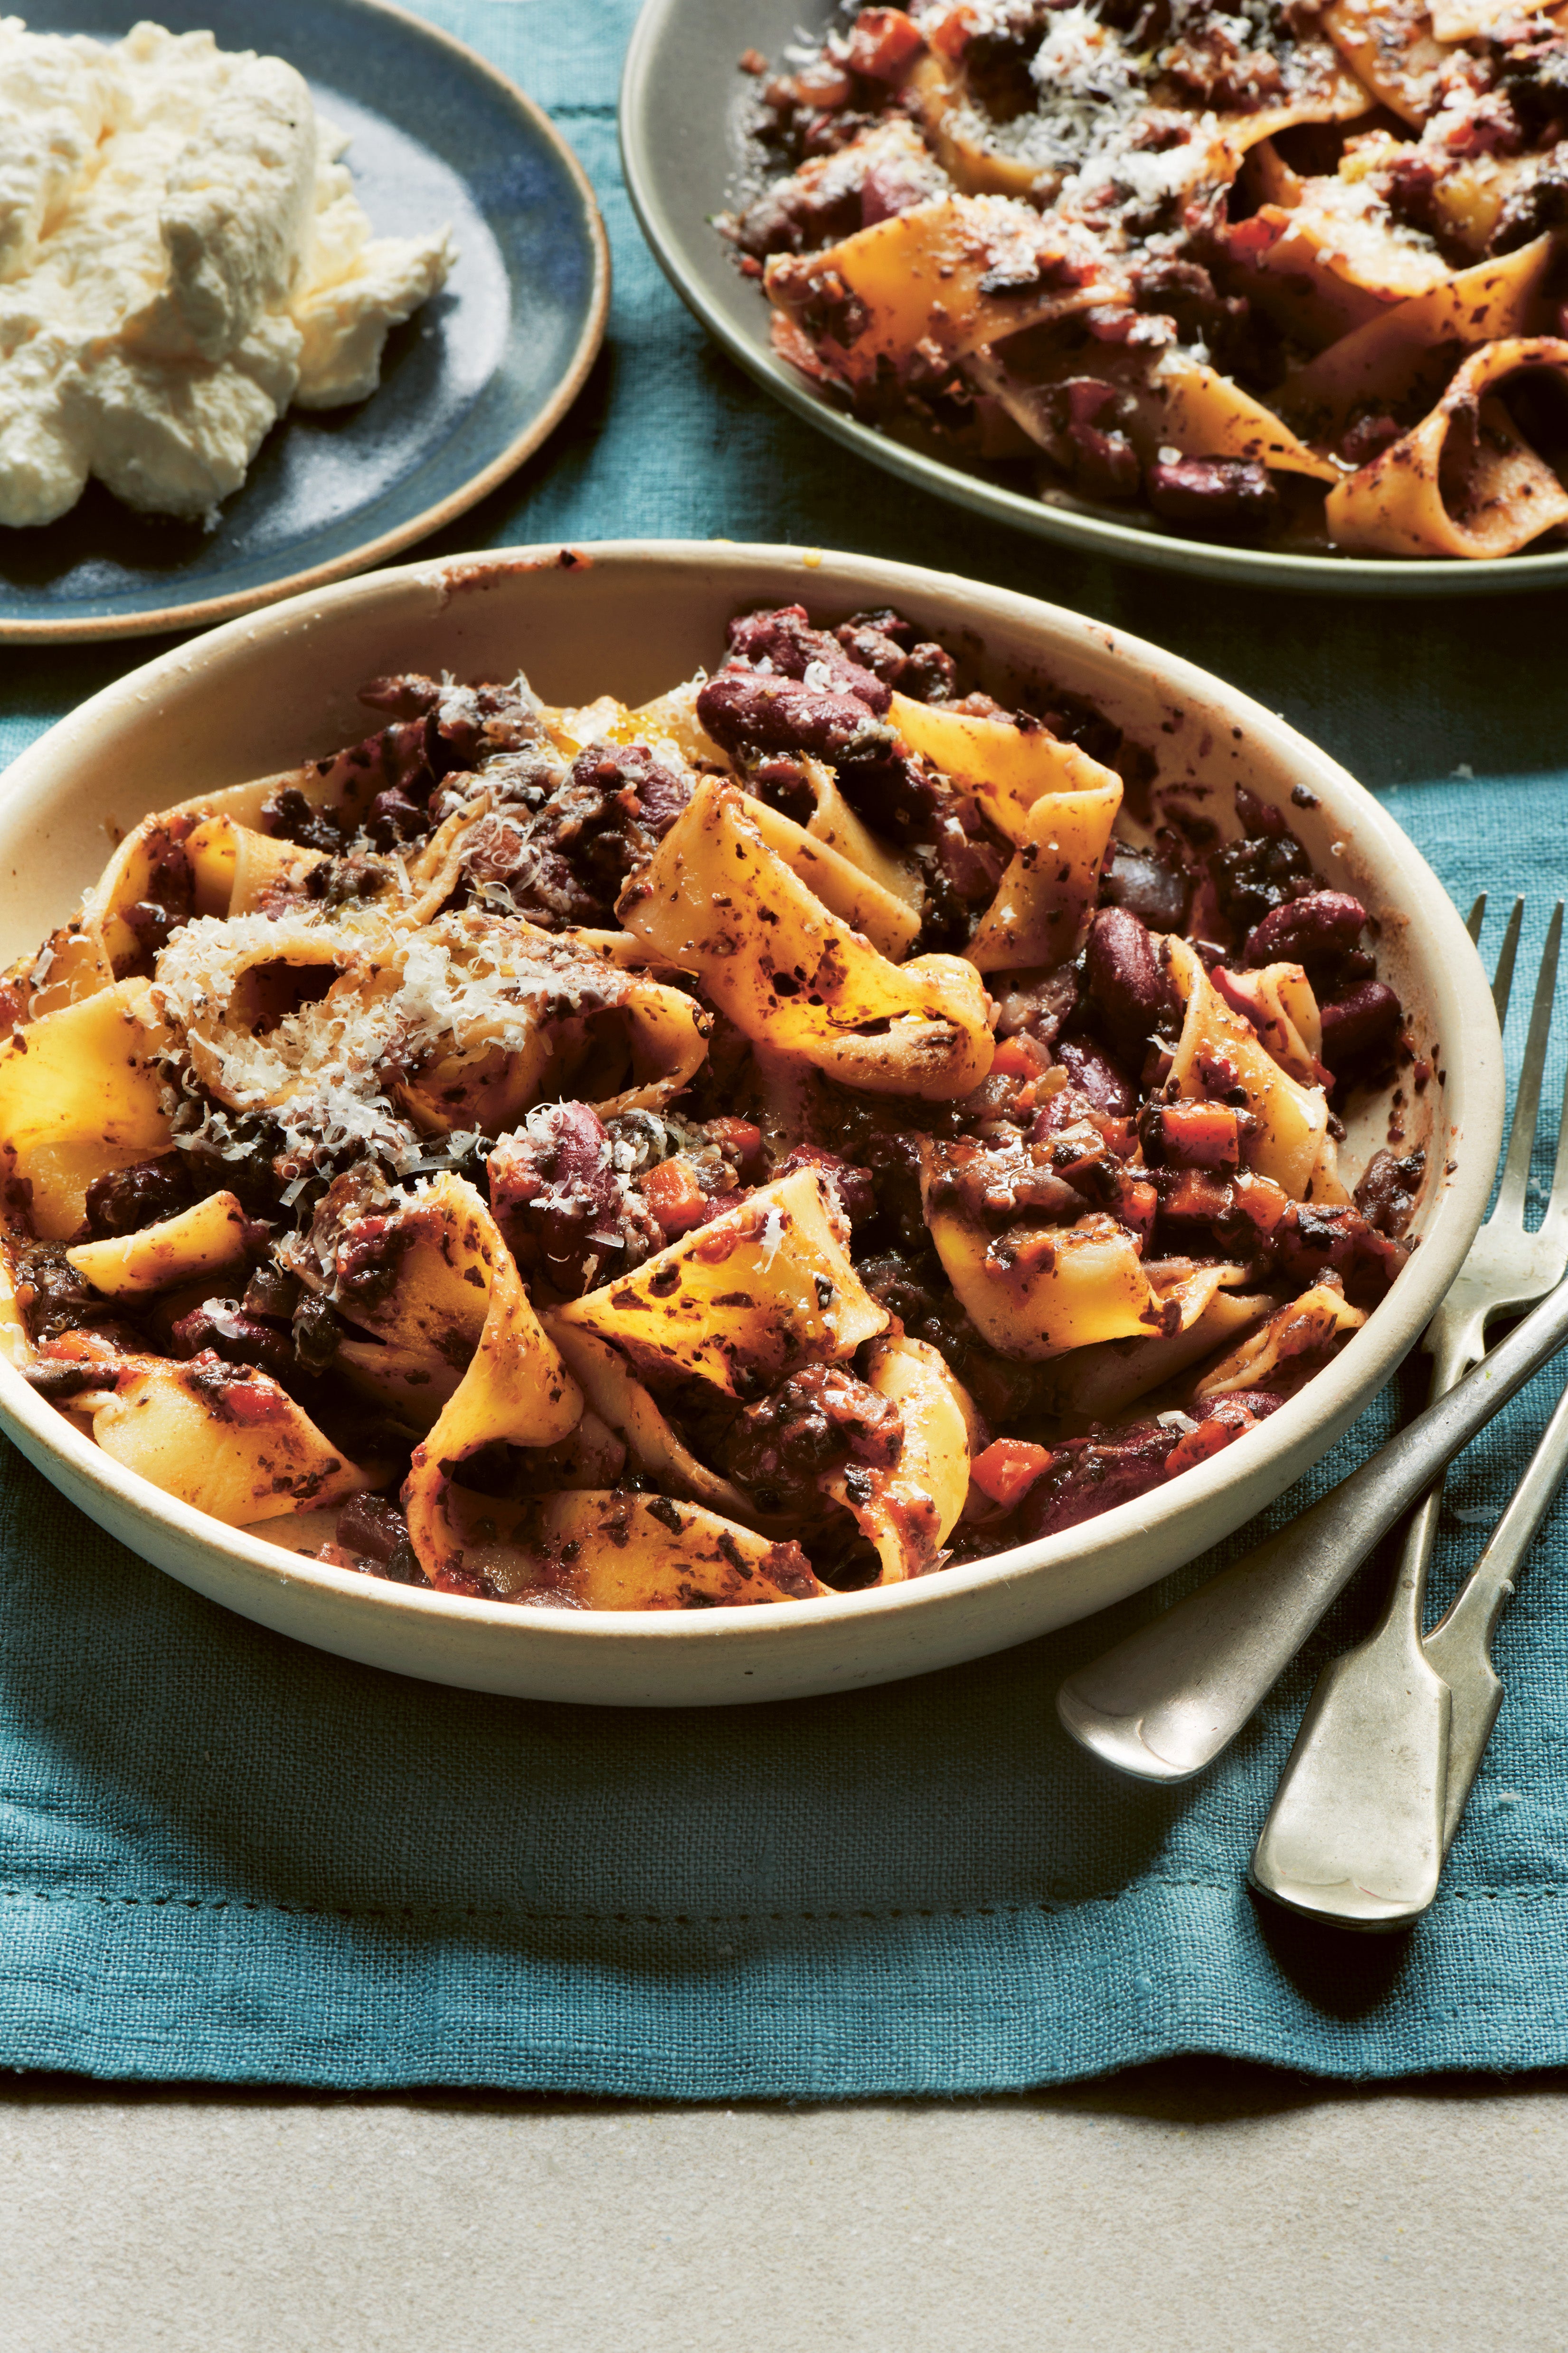 For when you’re craving hearty comfort food